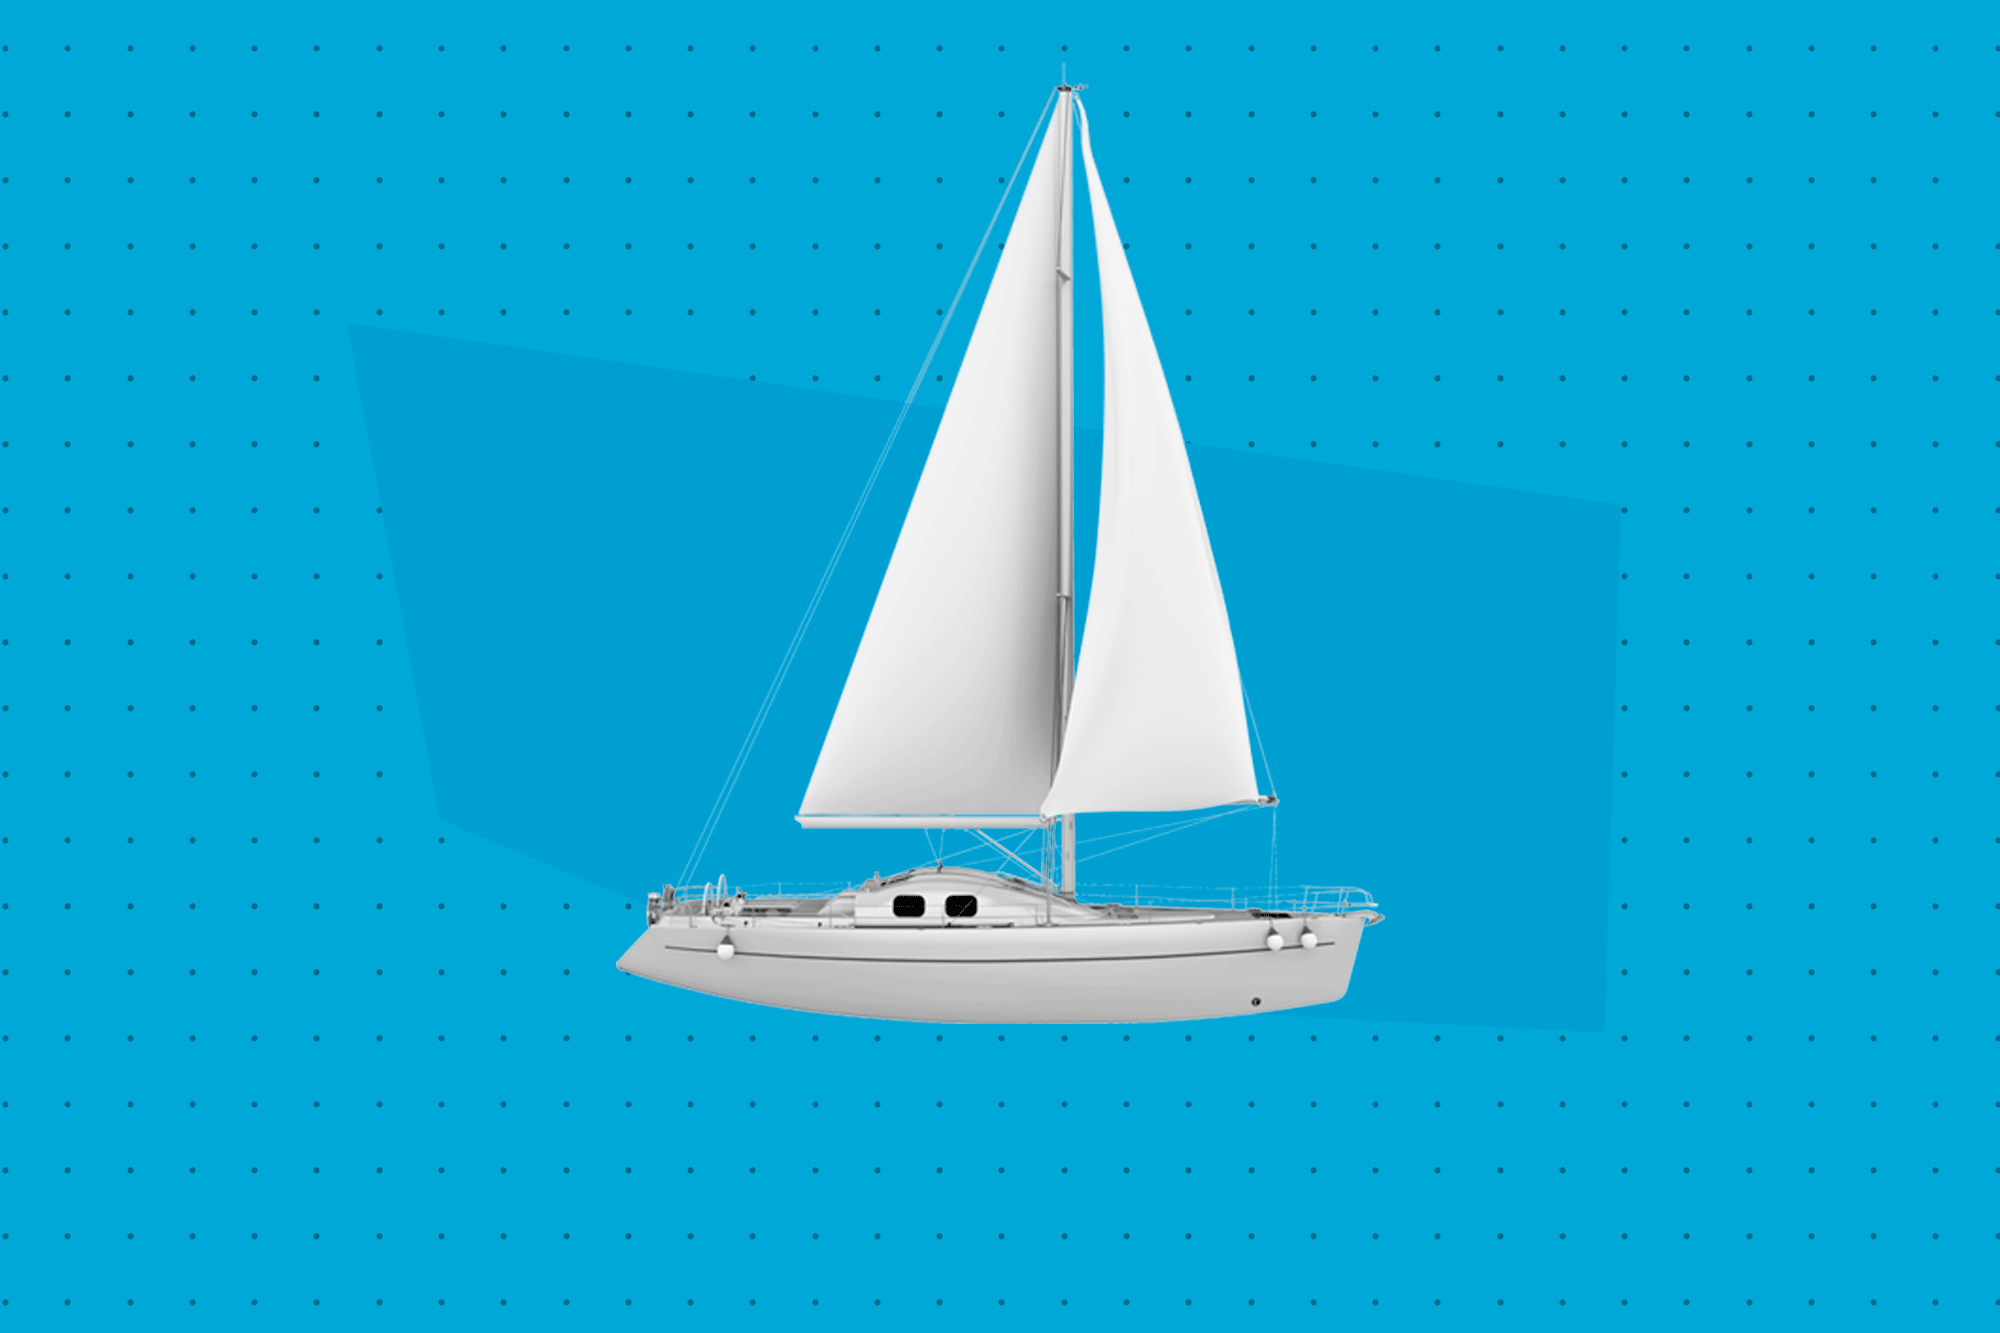 A sailboat on a blue background with textured dots. 